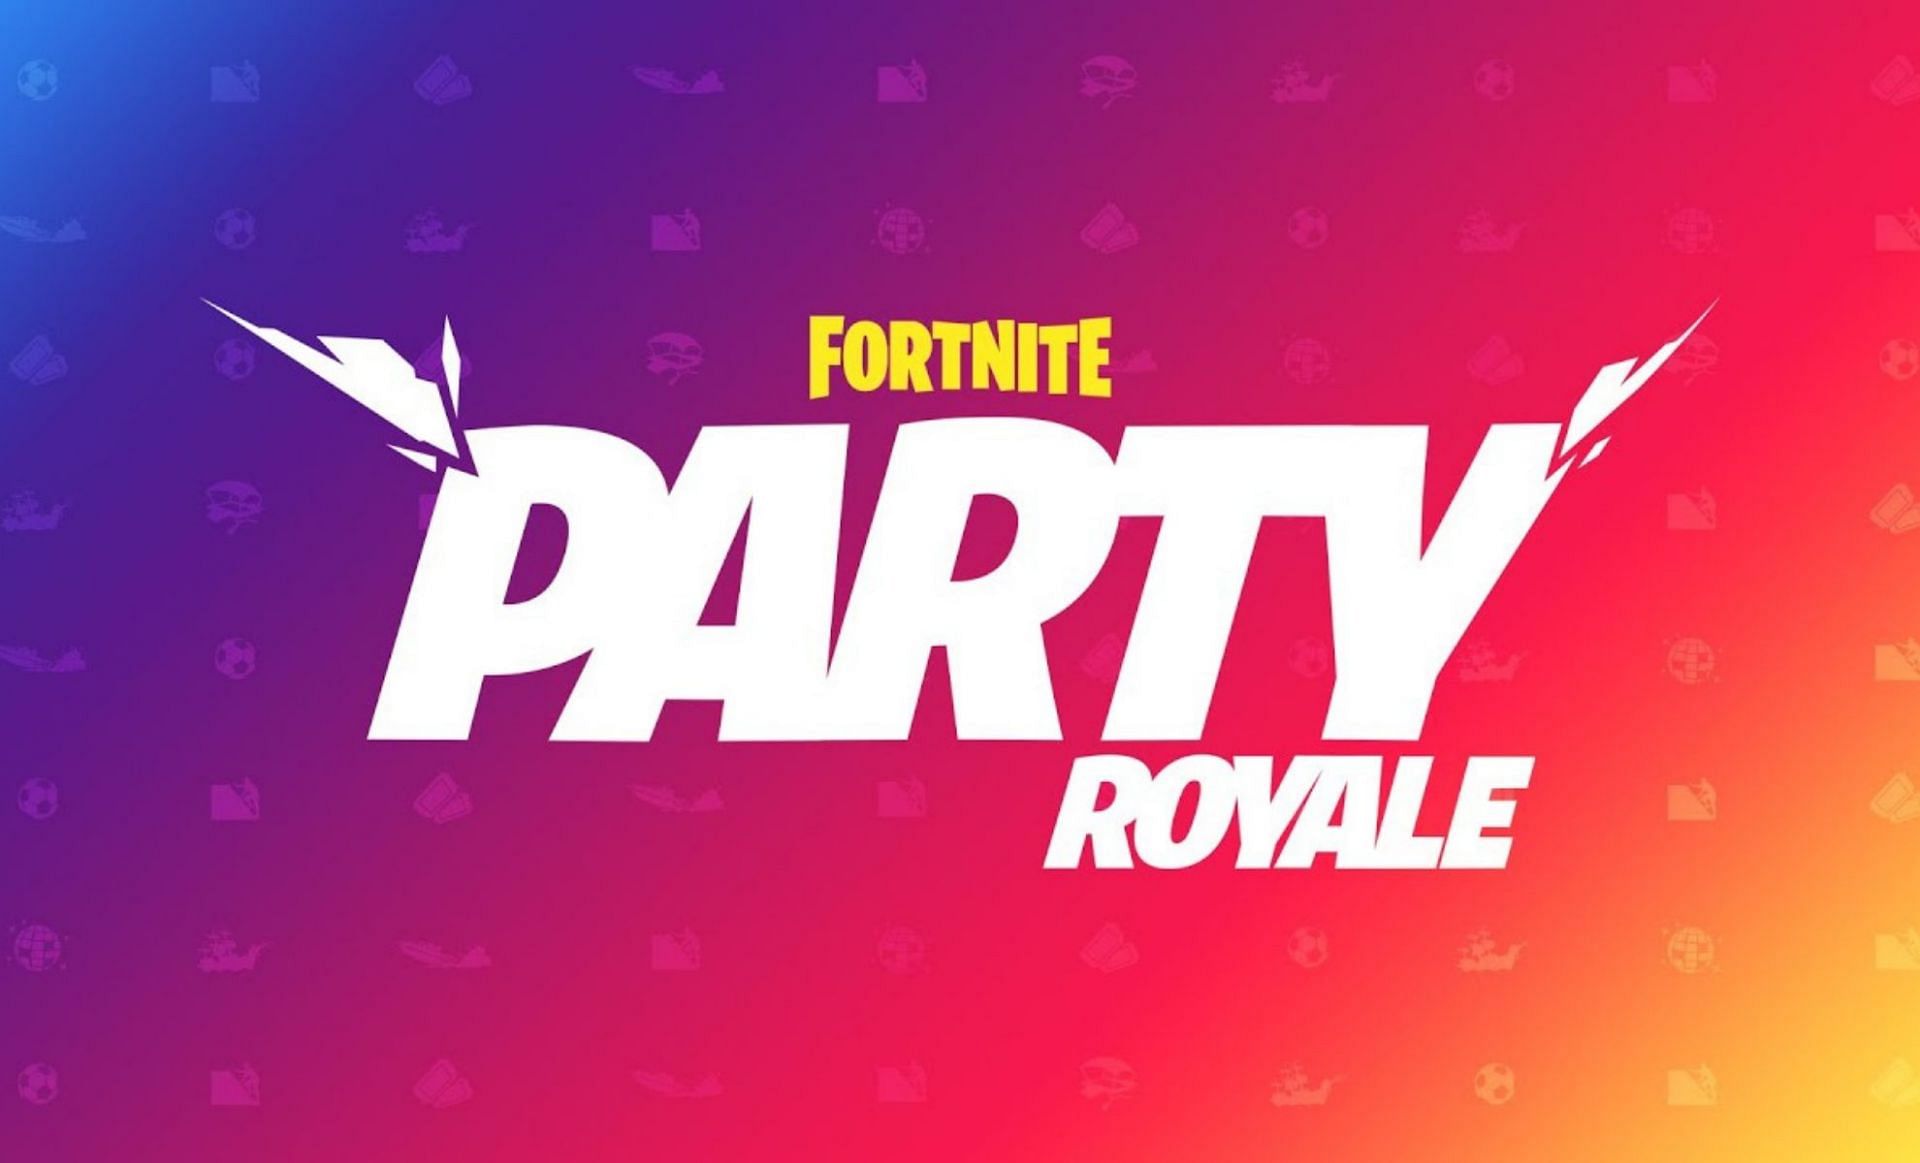 Users could relax and hang out with their friends in Party Royale (Image via Epic Games)